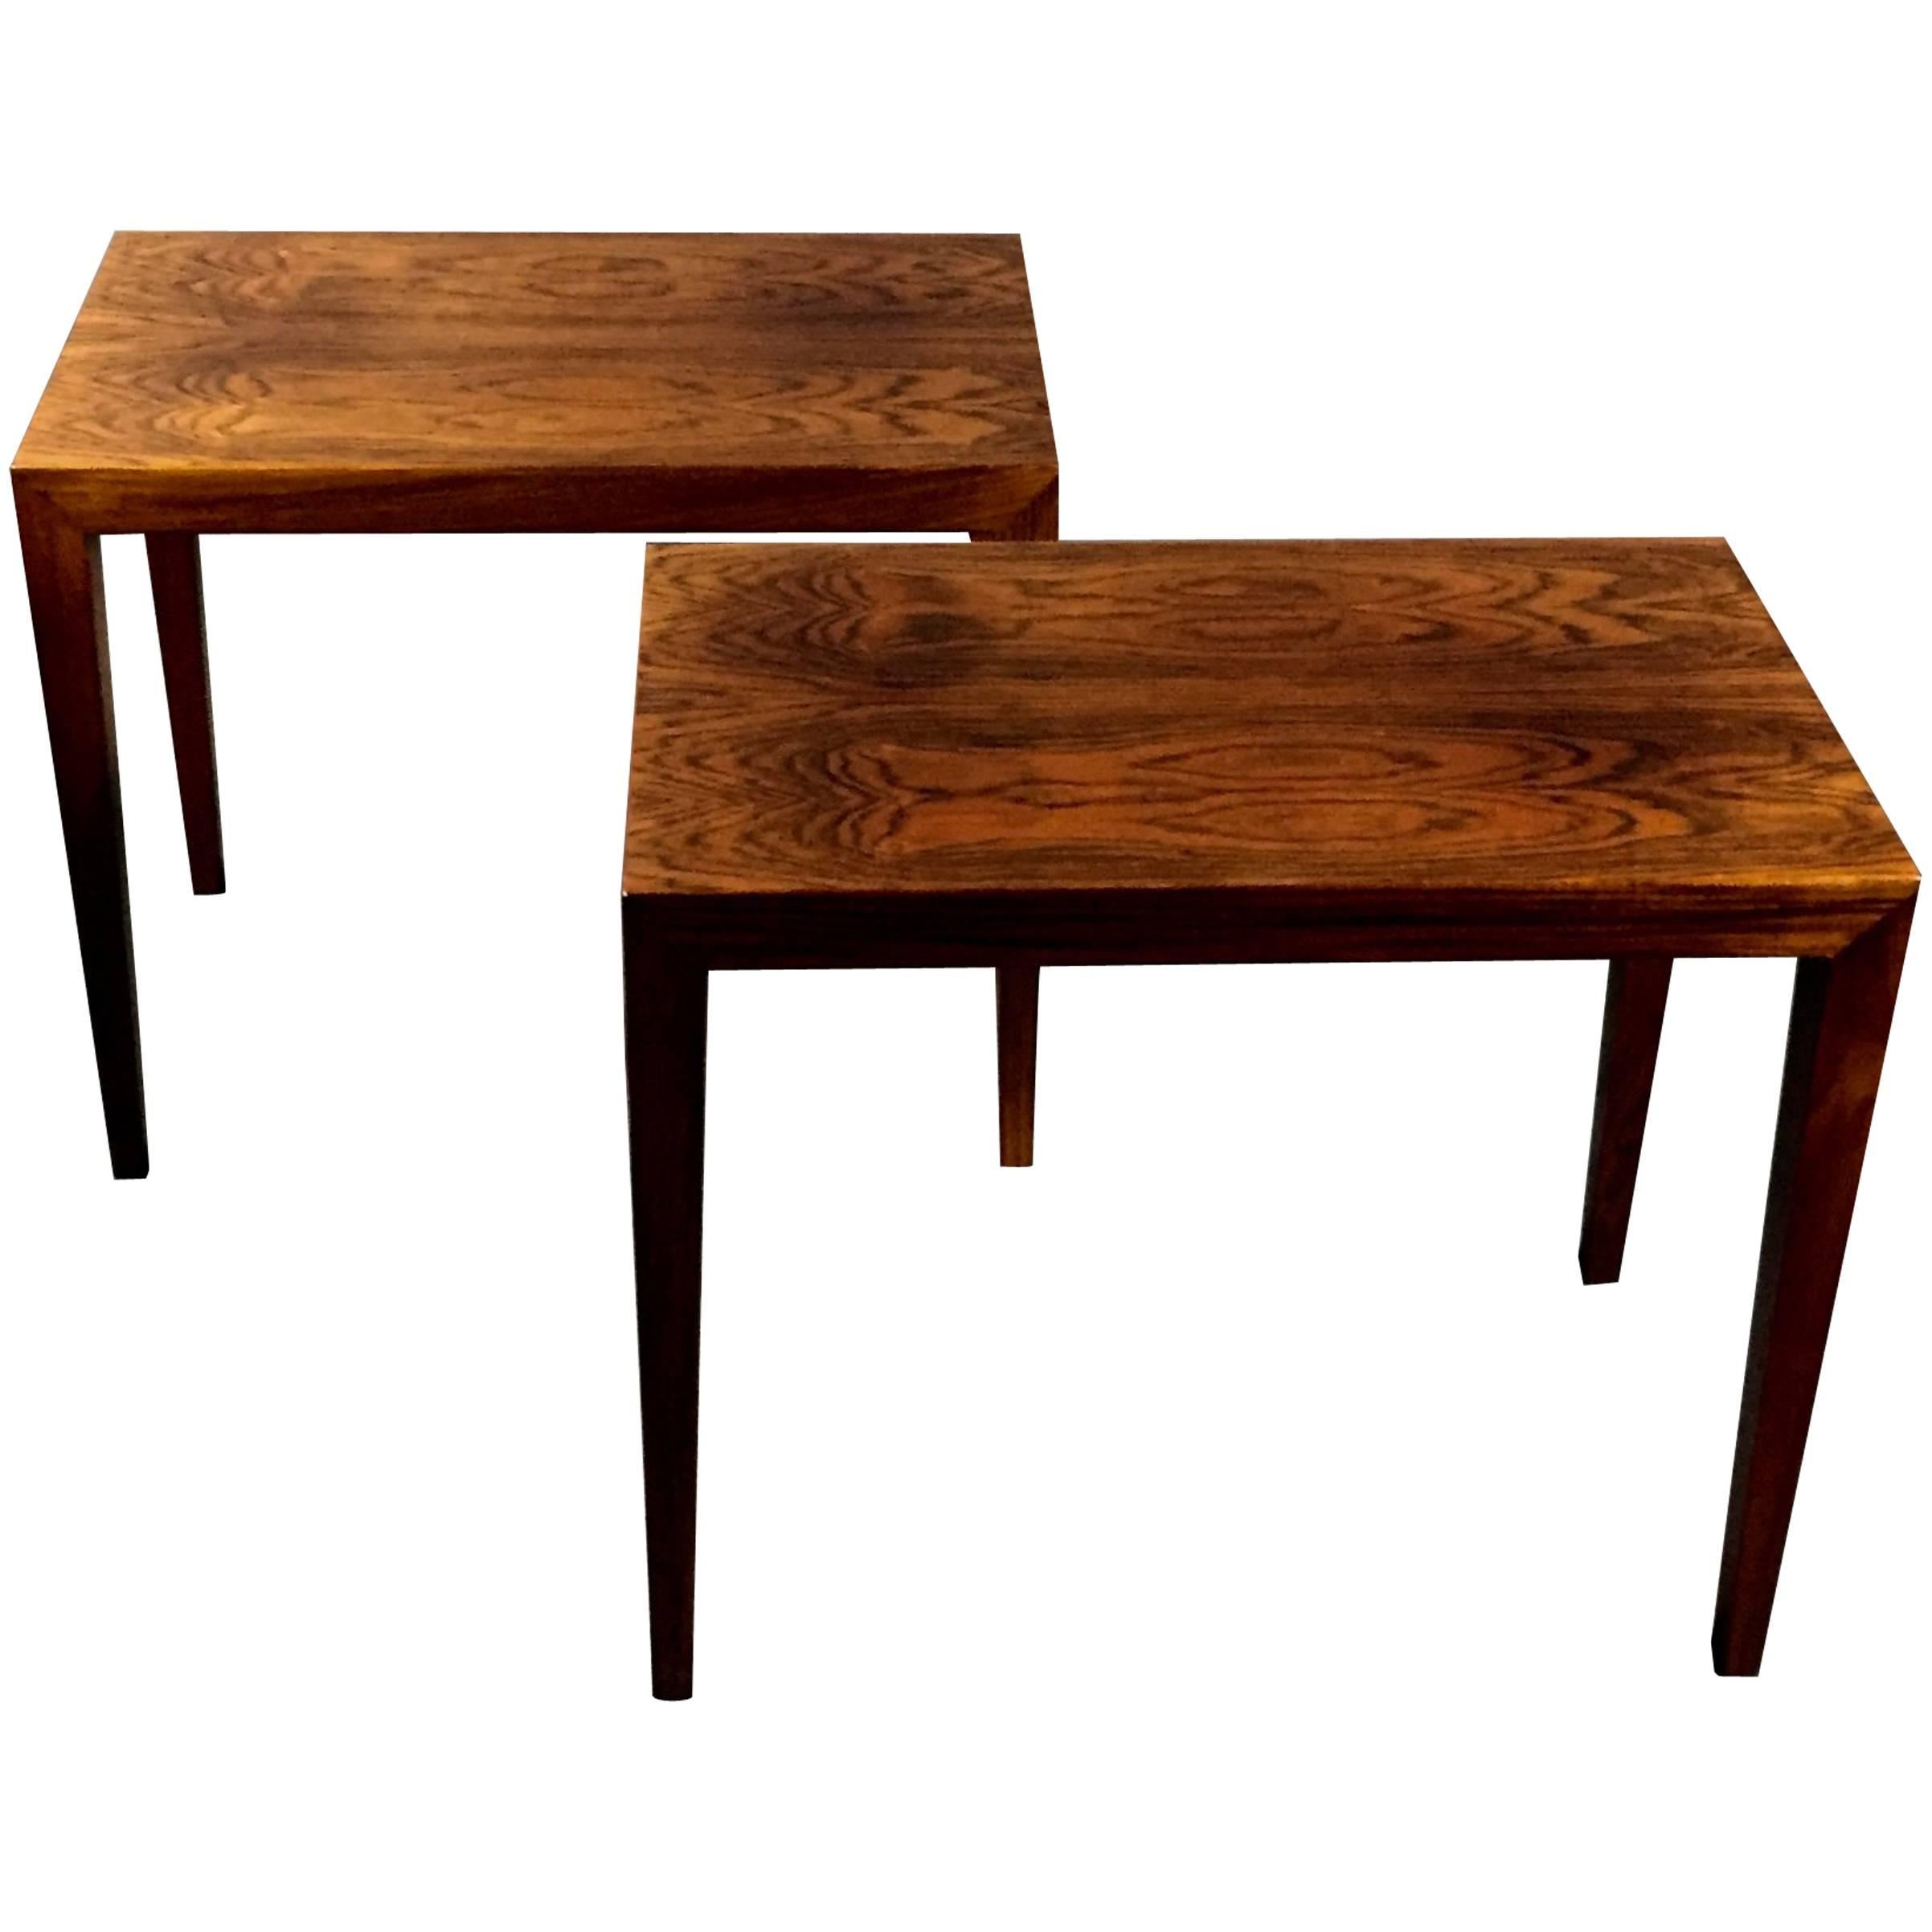 Pair of Severin Hansen Rosewood End Tables, Denmark, 1960s For Sale